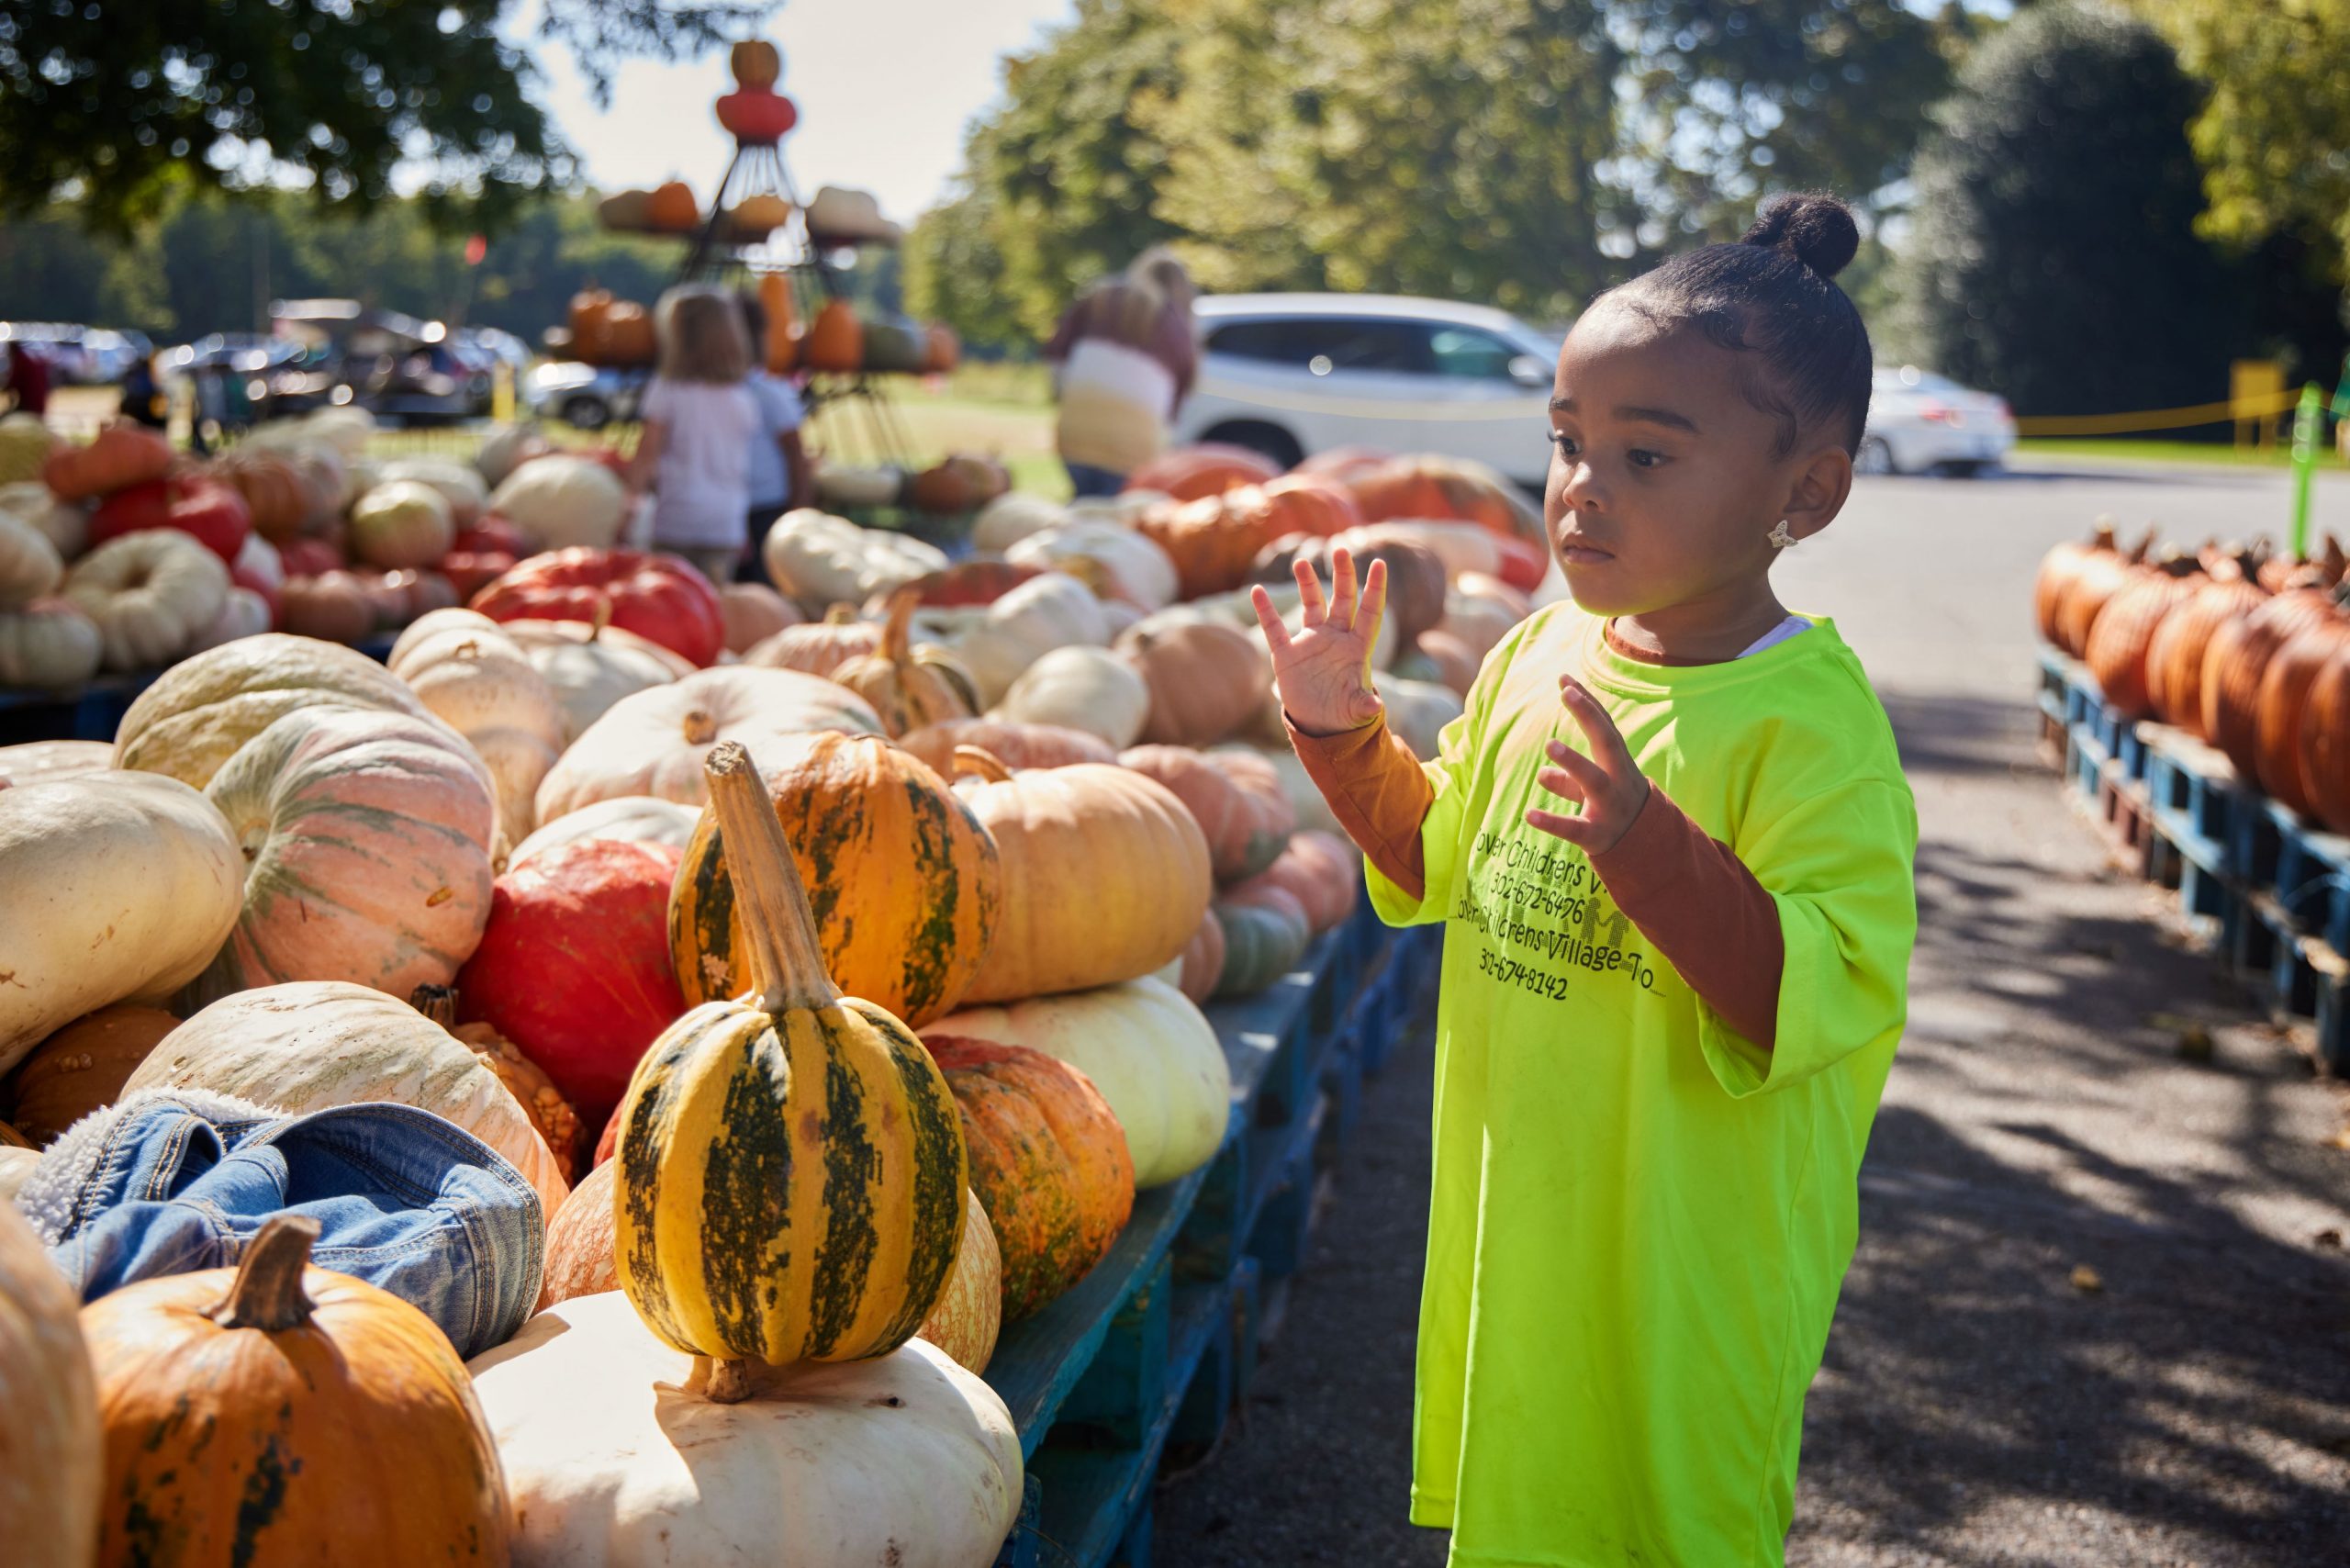 A young girl looking at the selection of pumpkins at Fifer Orchards.